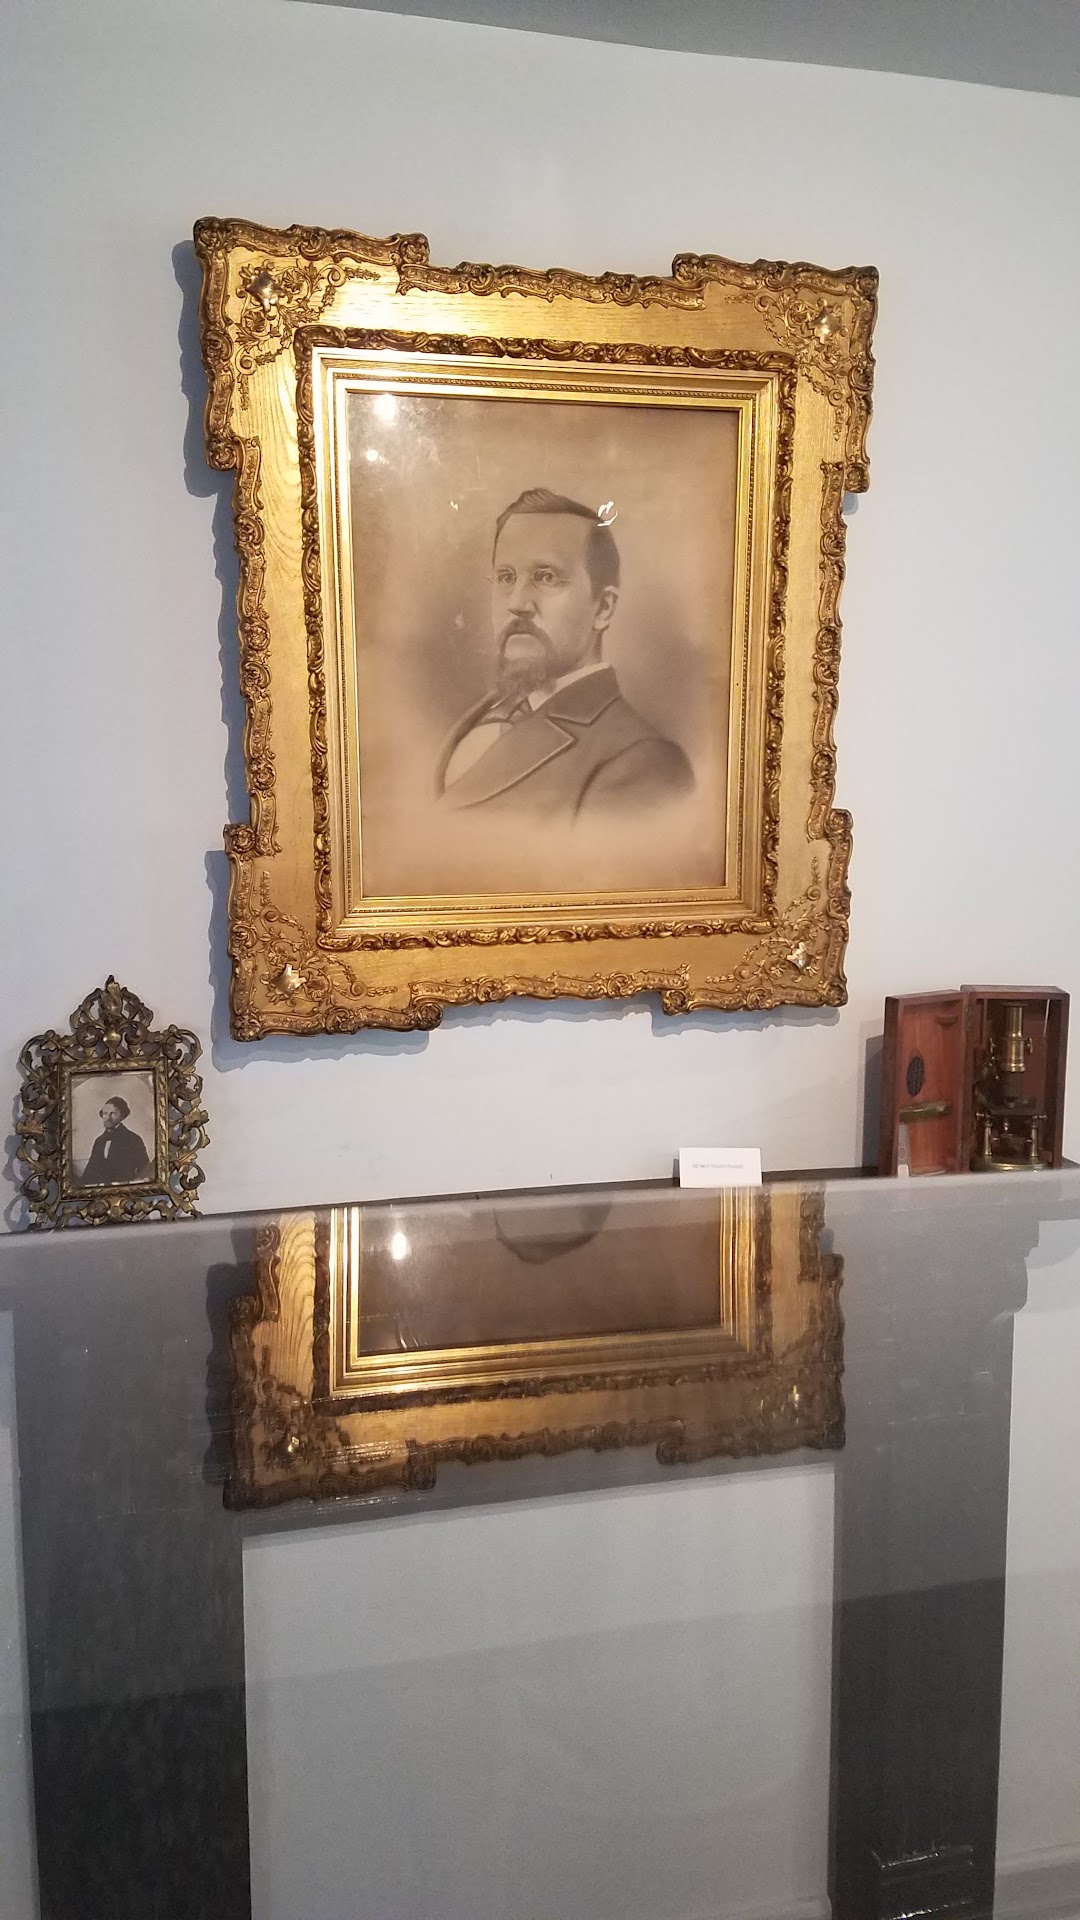 Dr. William Daviess Hutchings Office and Museum